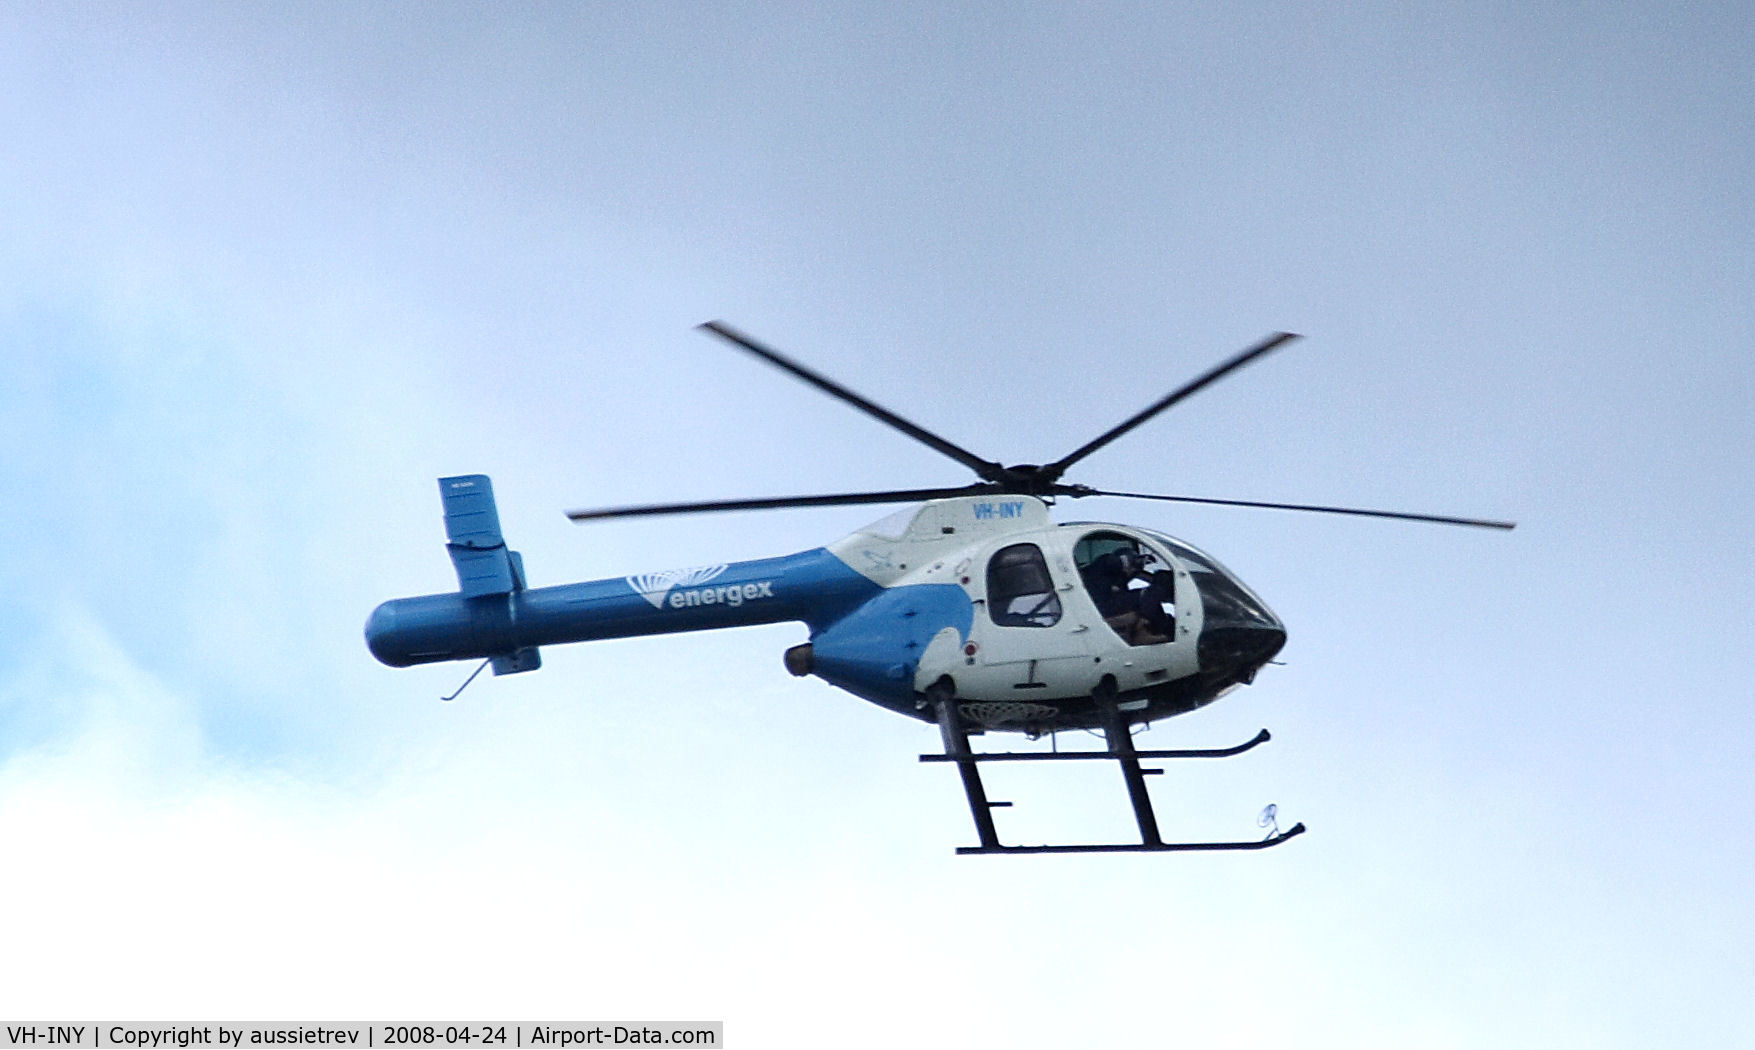 VH-INY, McDonnell Douglas MD-500N C/N LN002, Energex inspecting the new 110Kv Power line installation. First pic for database